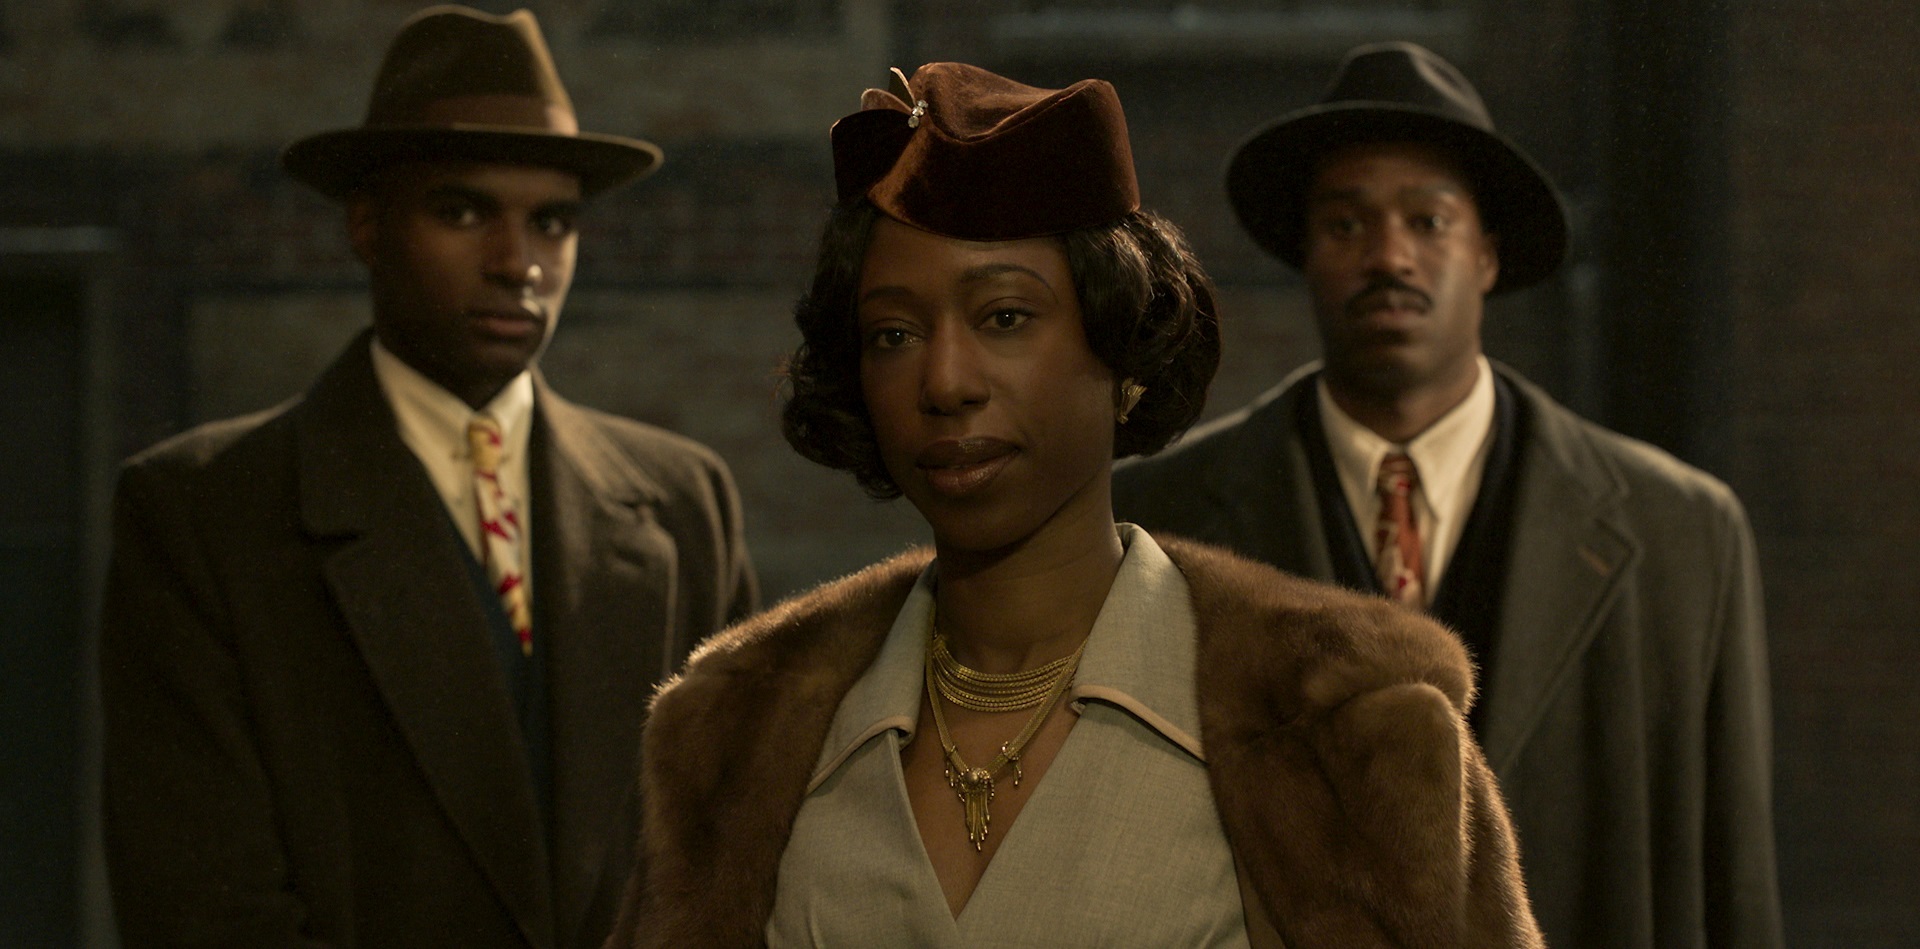 Nikki Amuka-Bird (centre) as Violet LaFontaine in The Outfit